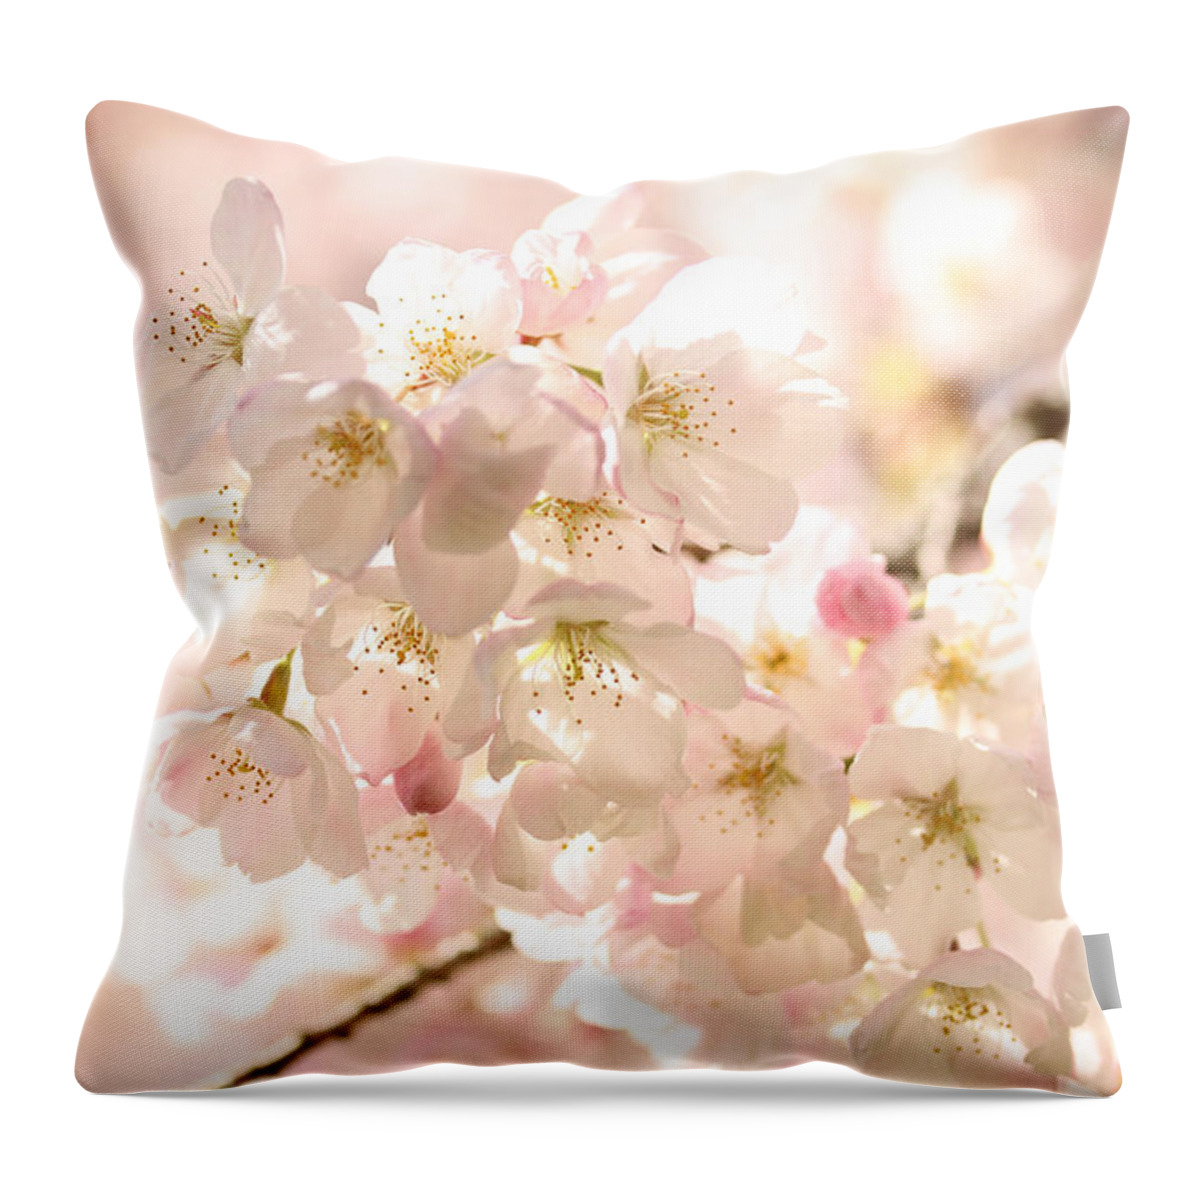 Connie Handscomb Throw Pillow featuring the photograph Aglow by Connie Handscomb